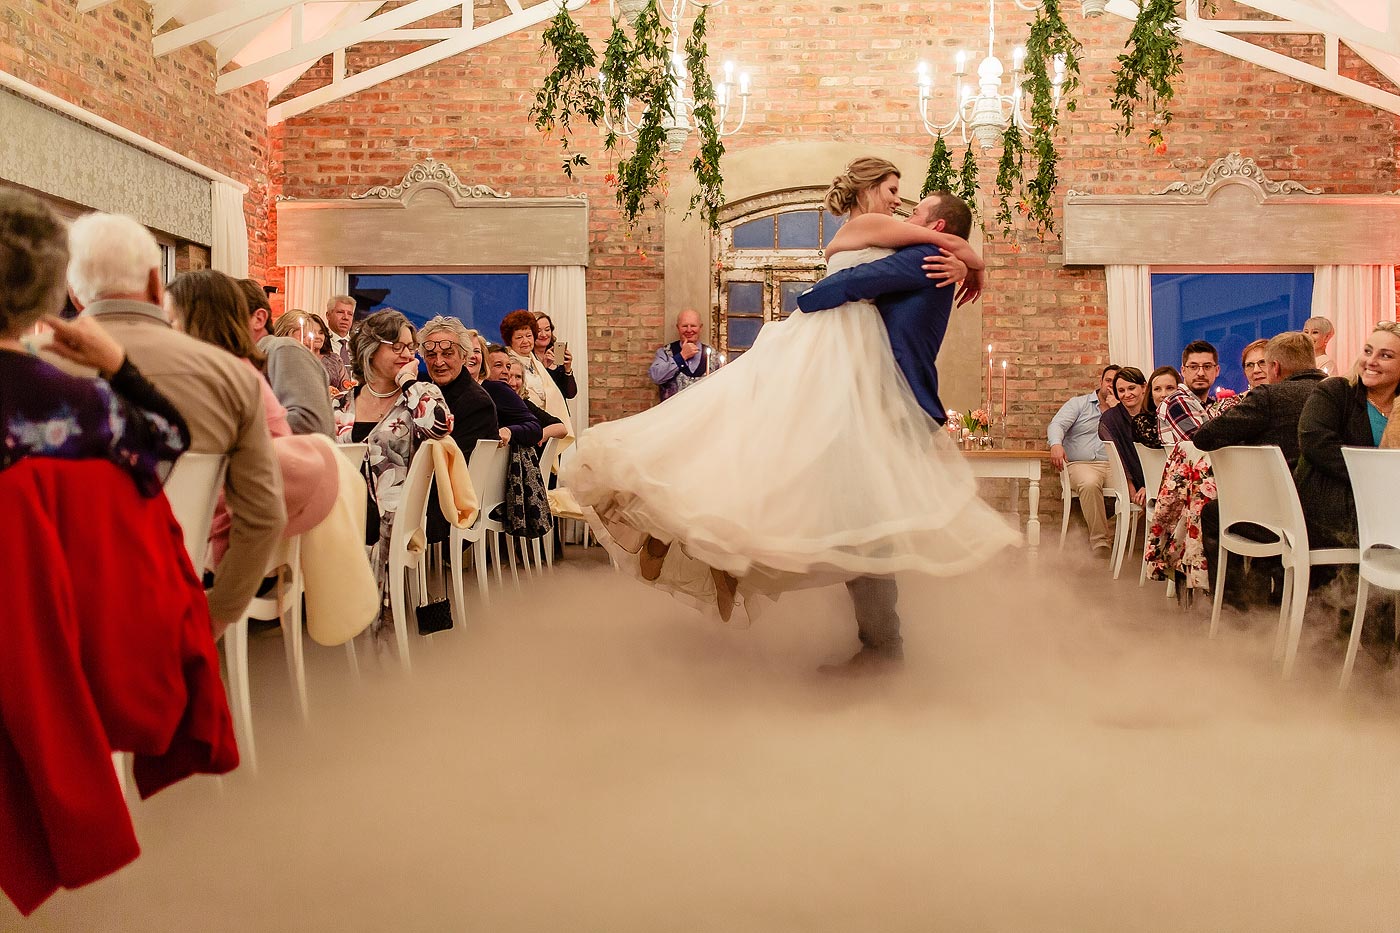 Smoke machine on the dancefloor during the wedding first dance in the Garden Route, South Africa.